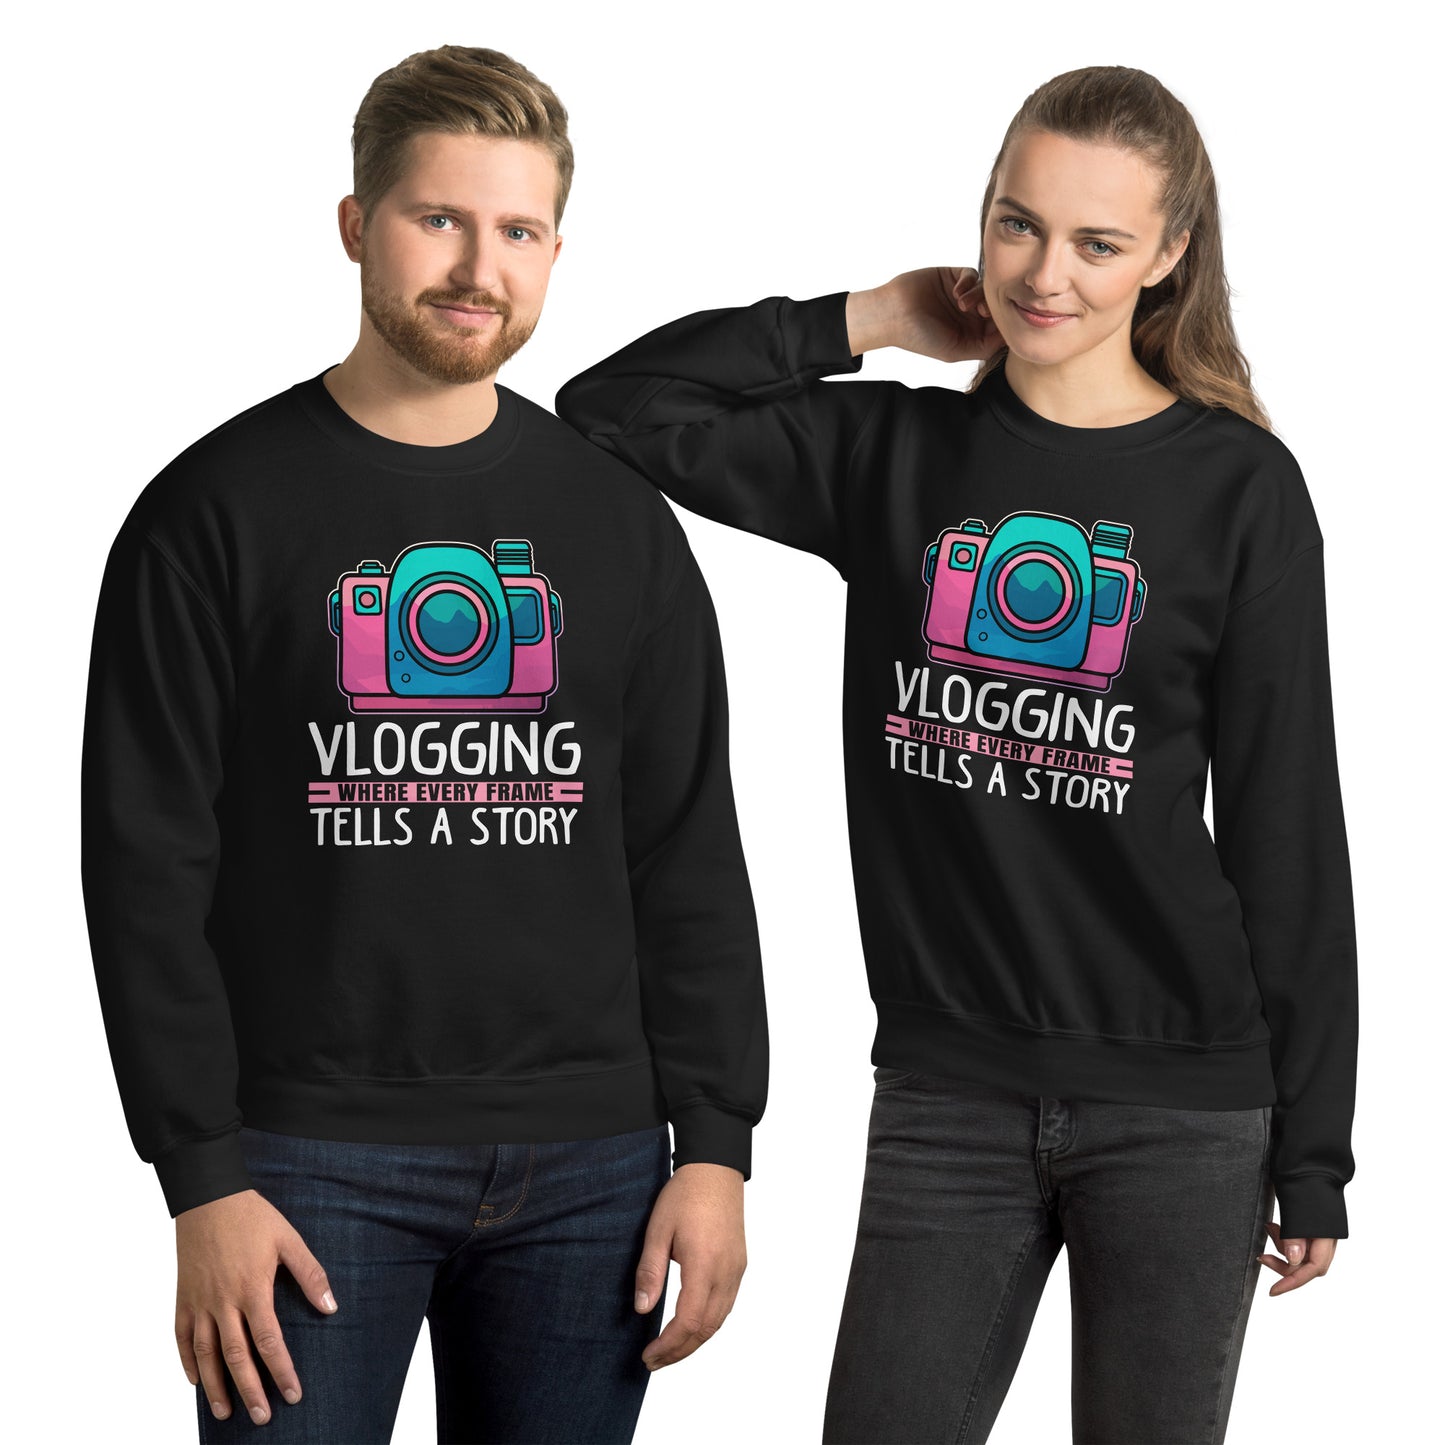 Vlogging where every Frame tells a Story Pullover